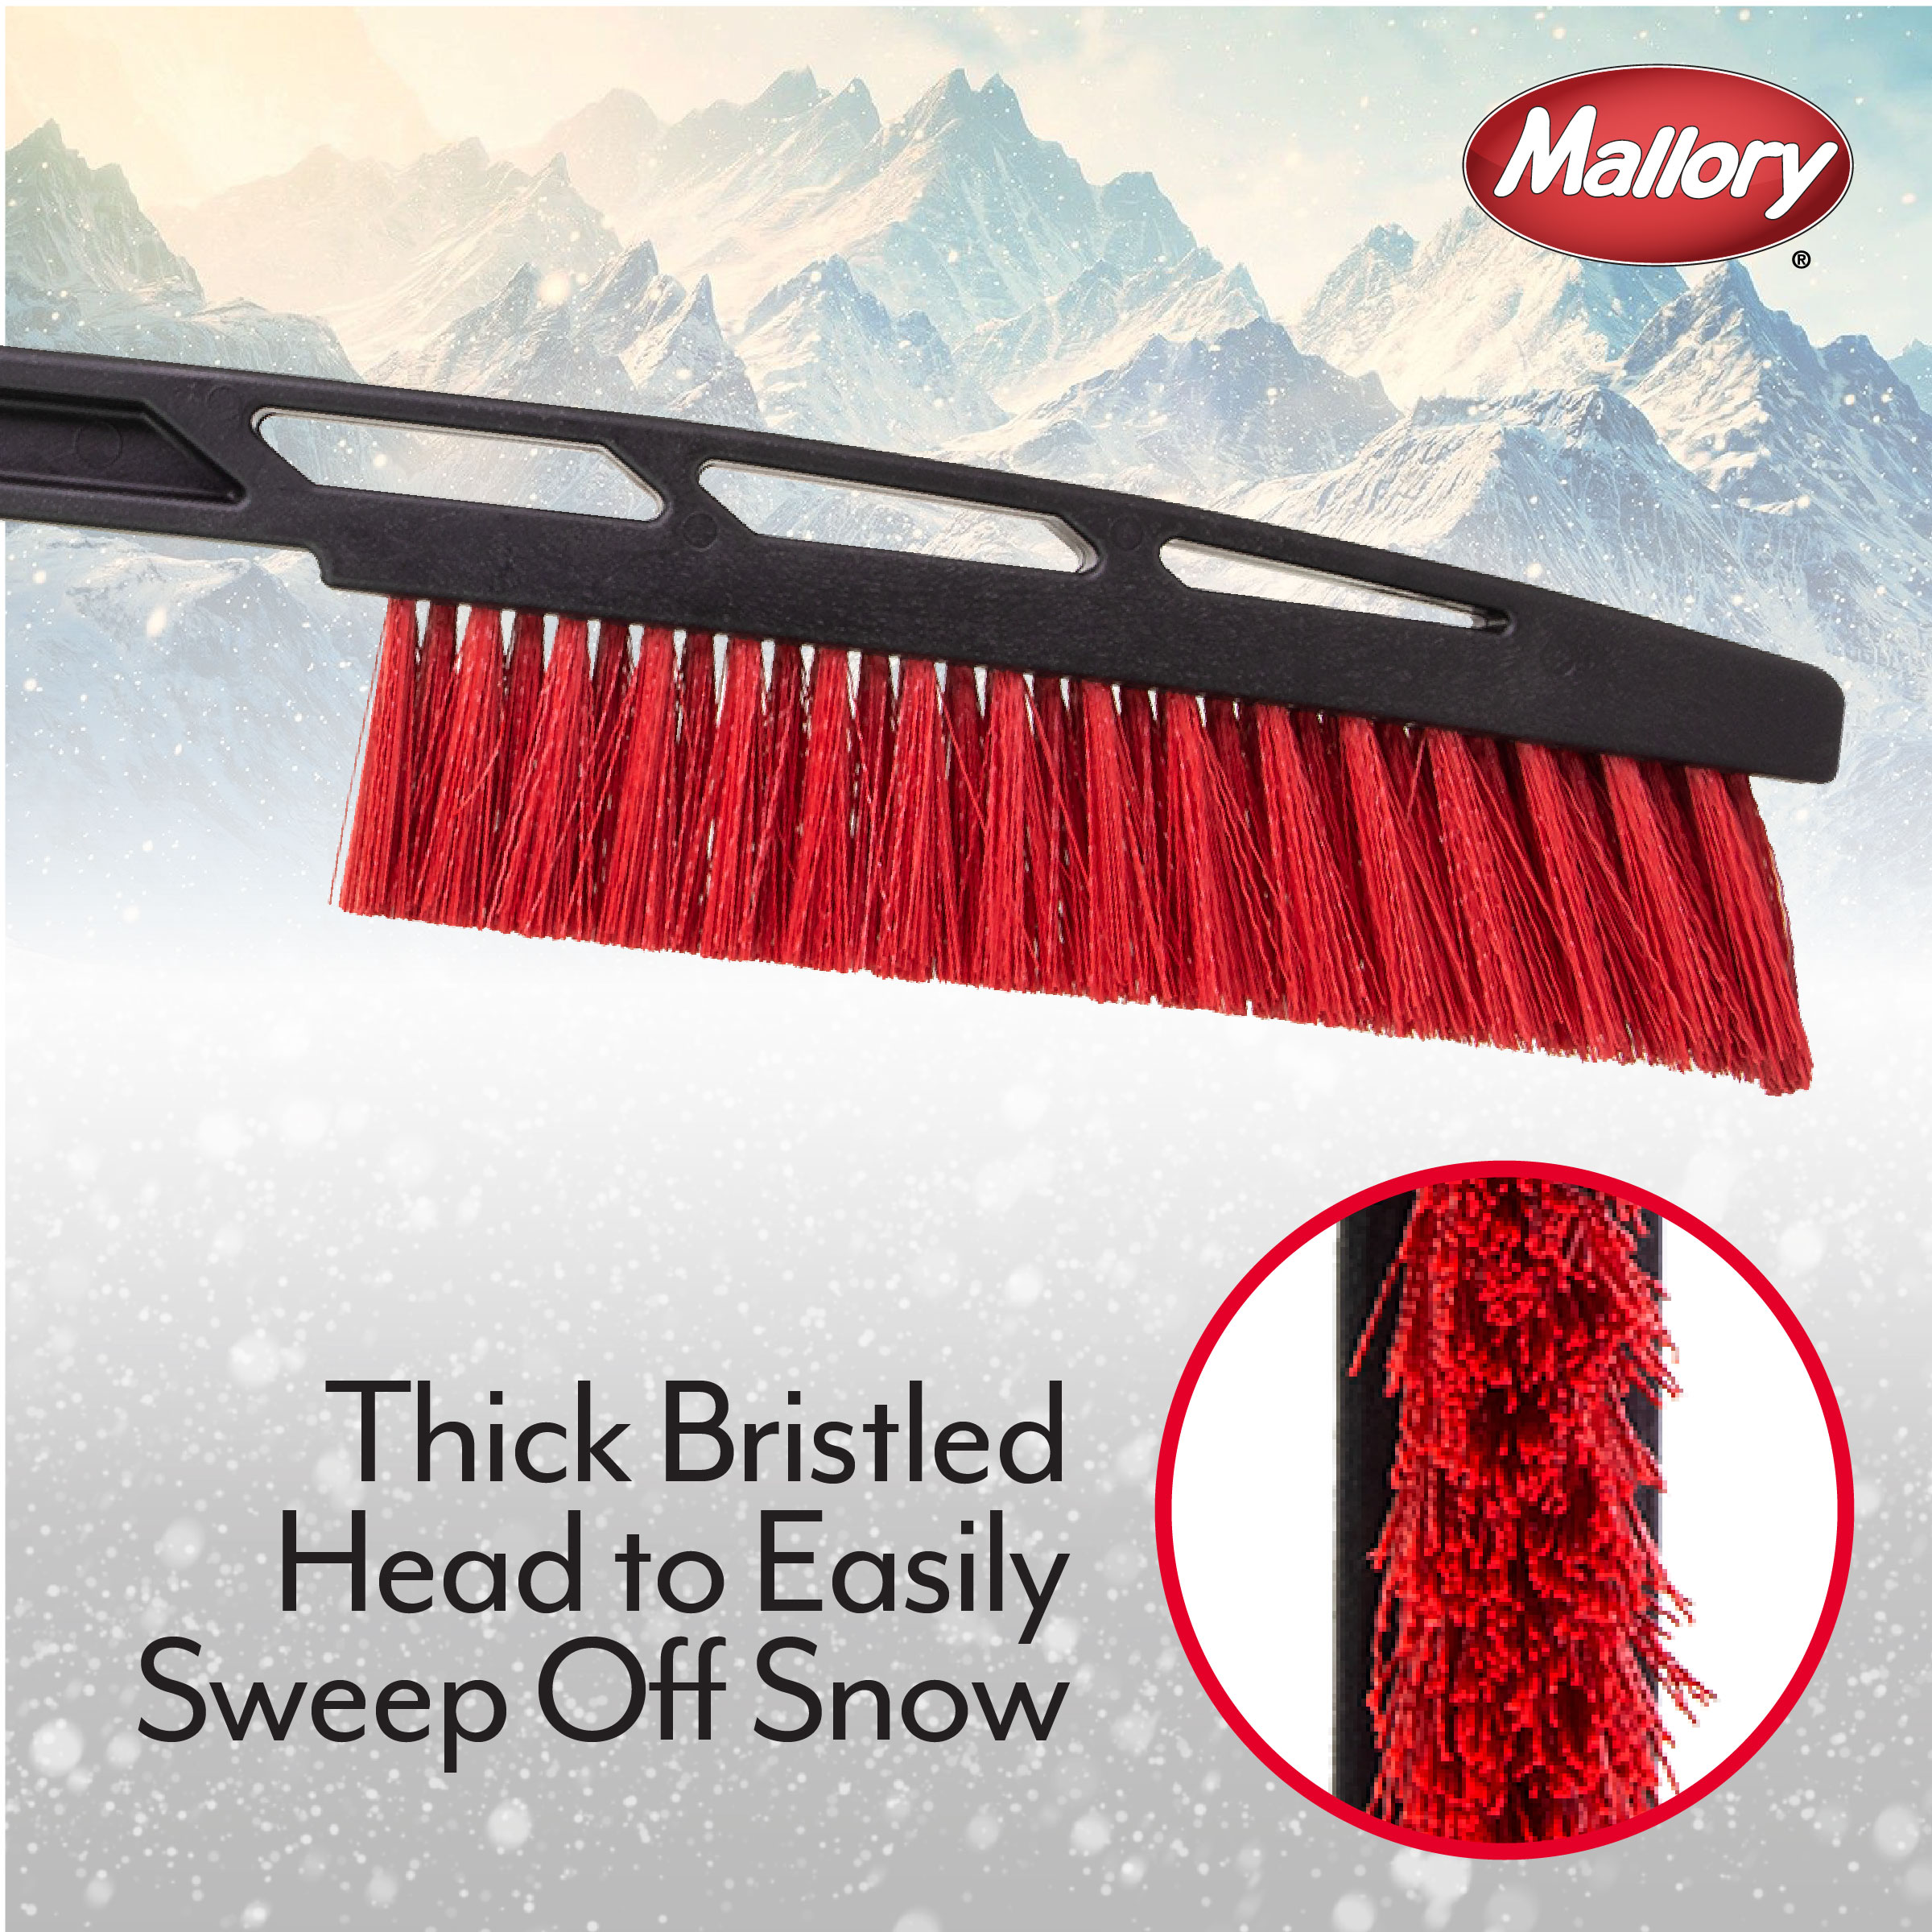 Mallory® 24 inches Slimline Snow Brush with Ice Scraper, Size: 24", 523, 1 pack - image 4 of 6